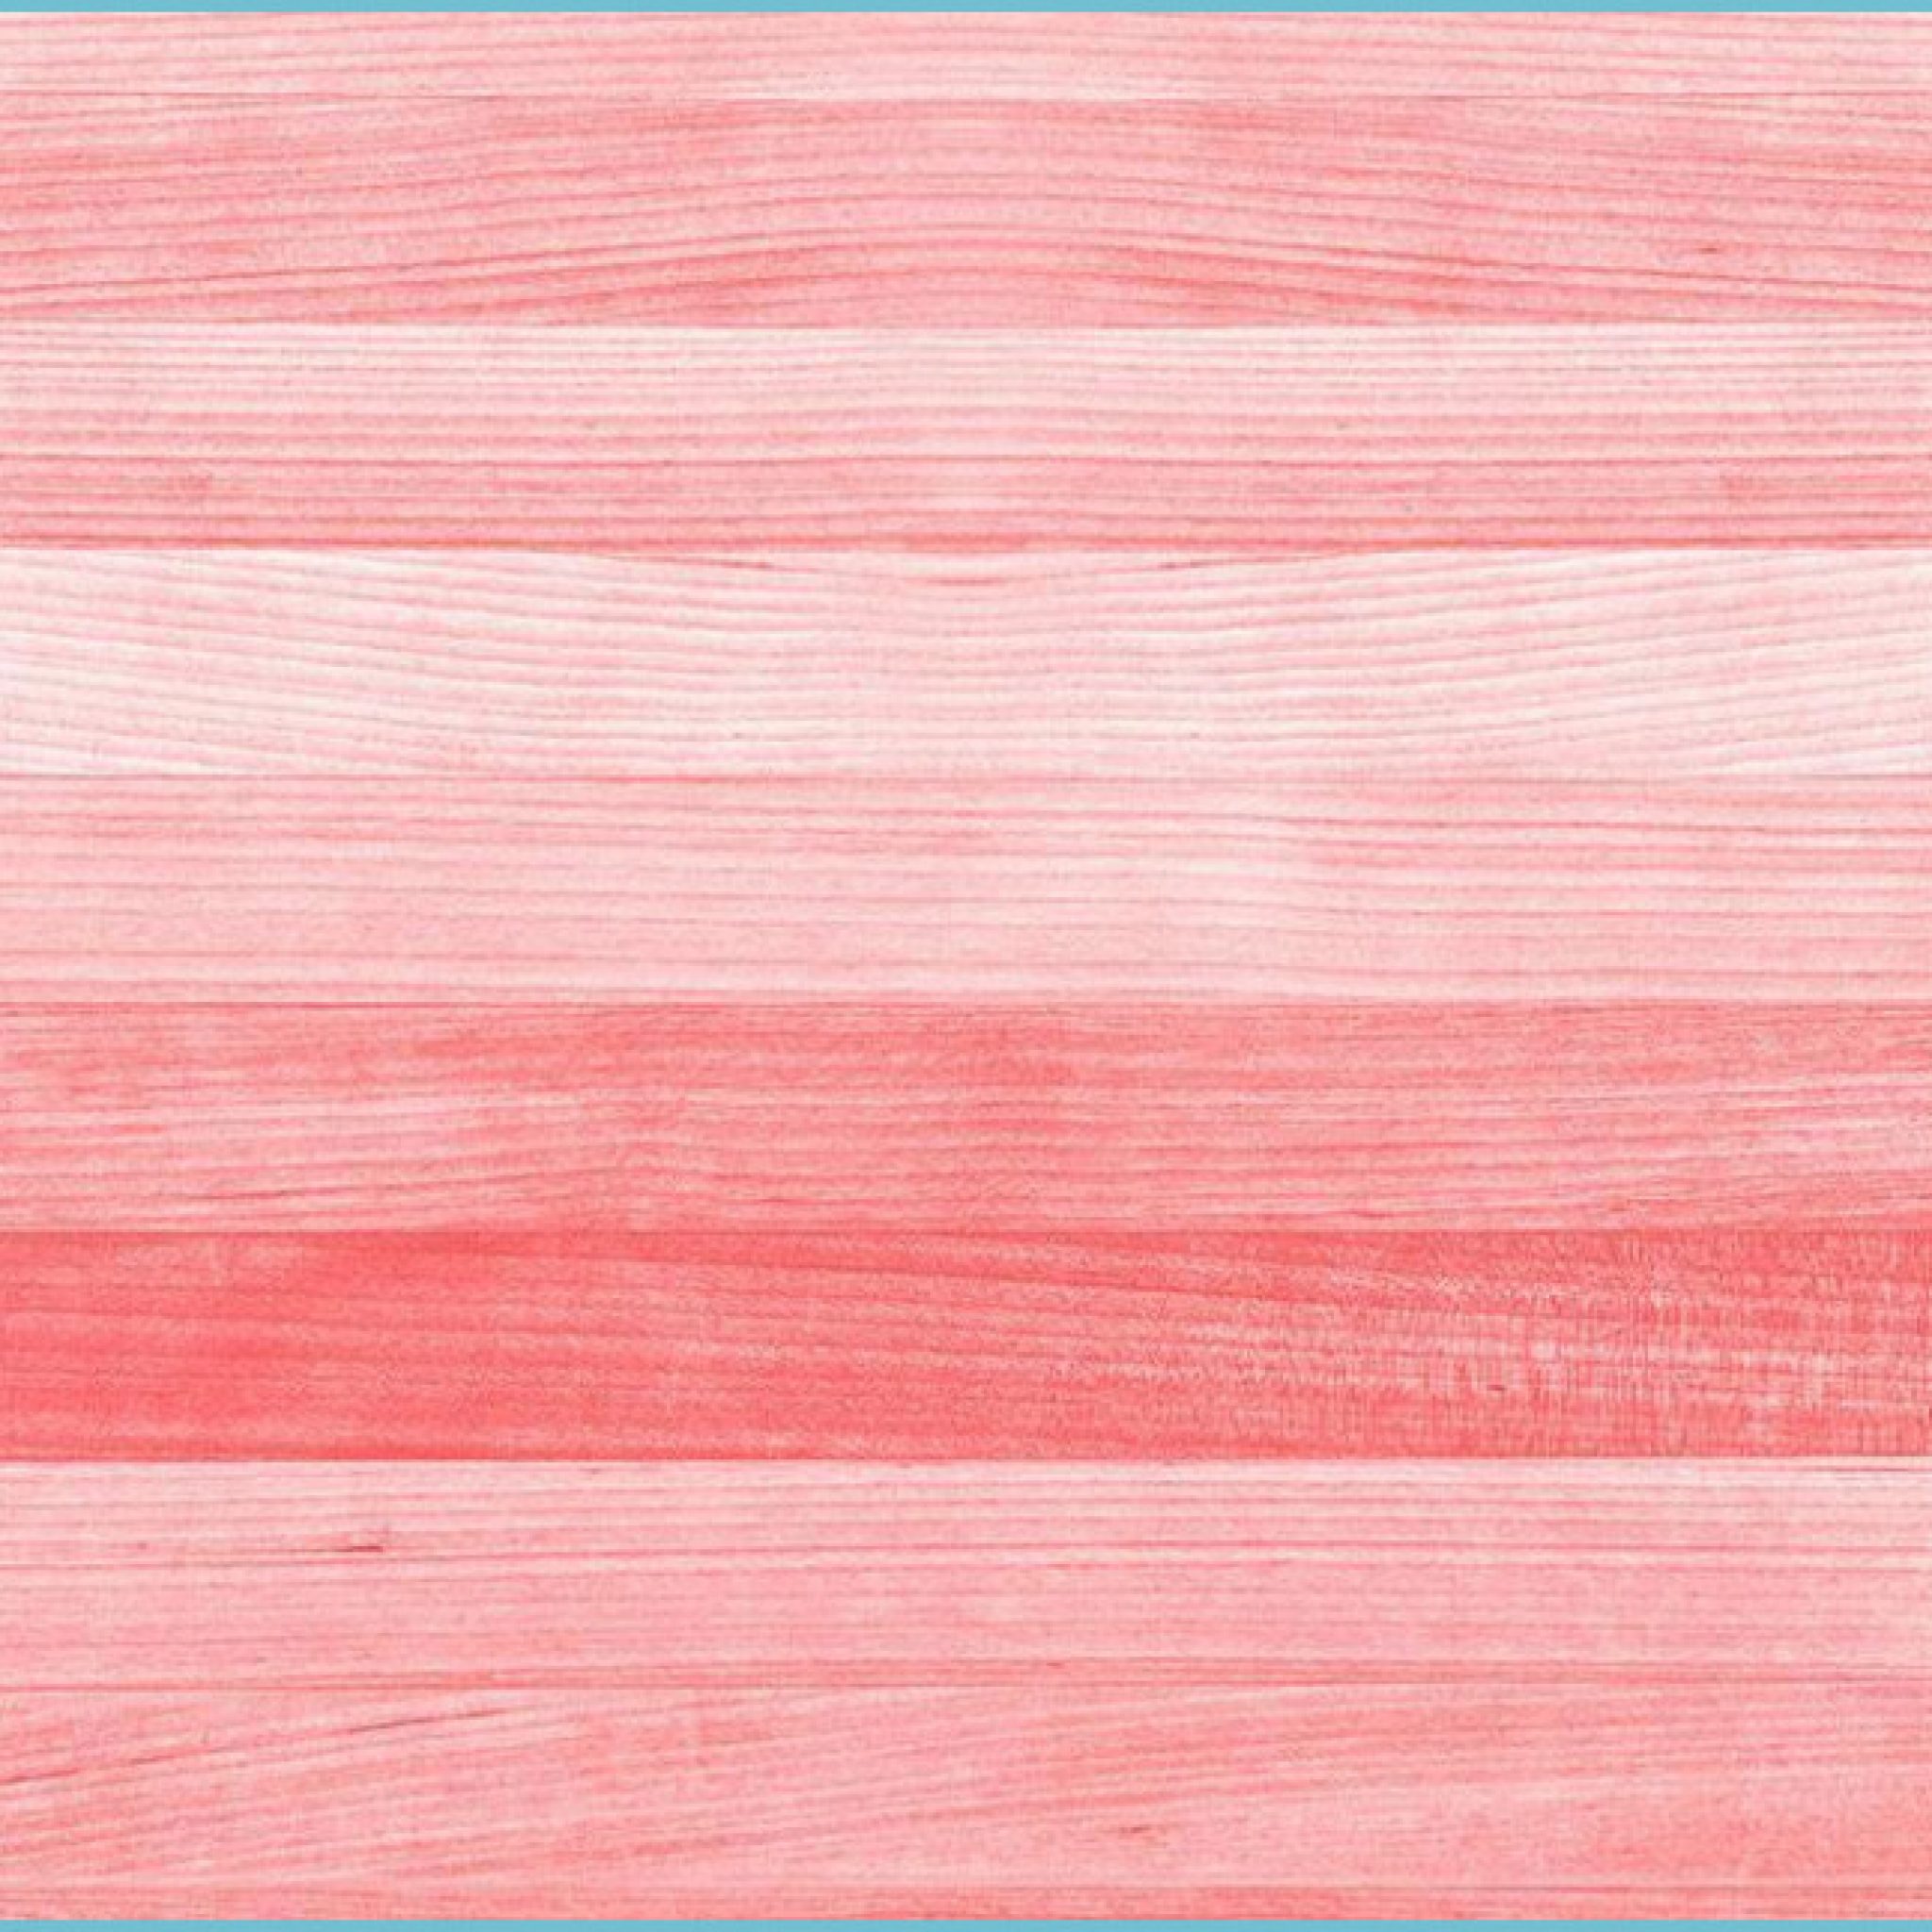 Coral Pink Or Peach And Salmon Color Wall Mural Wallpaper Pink Wallpaper